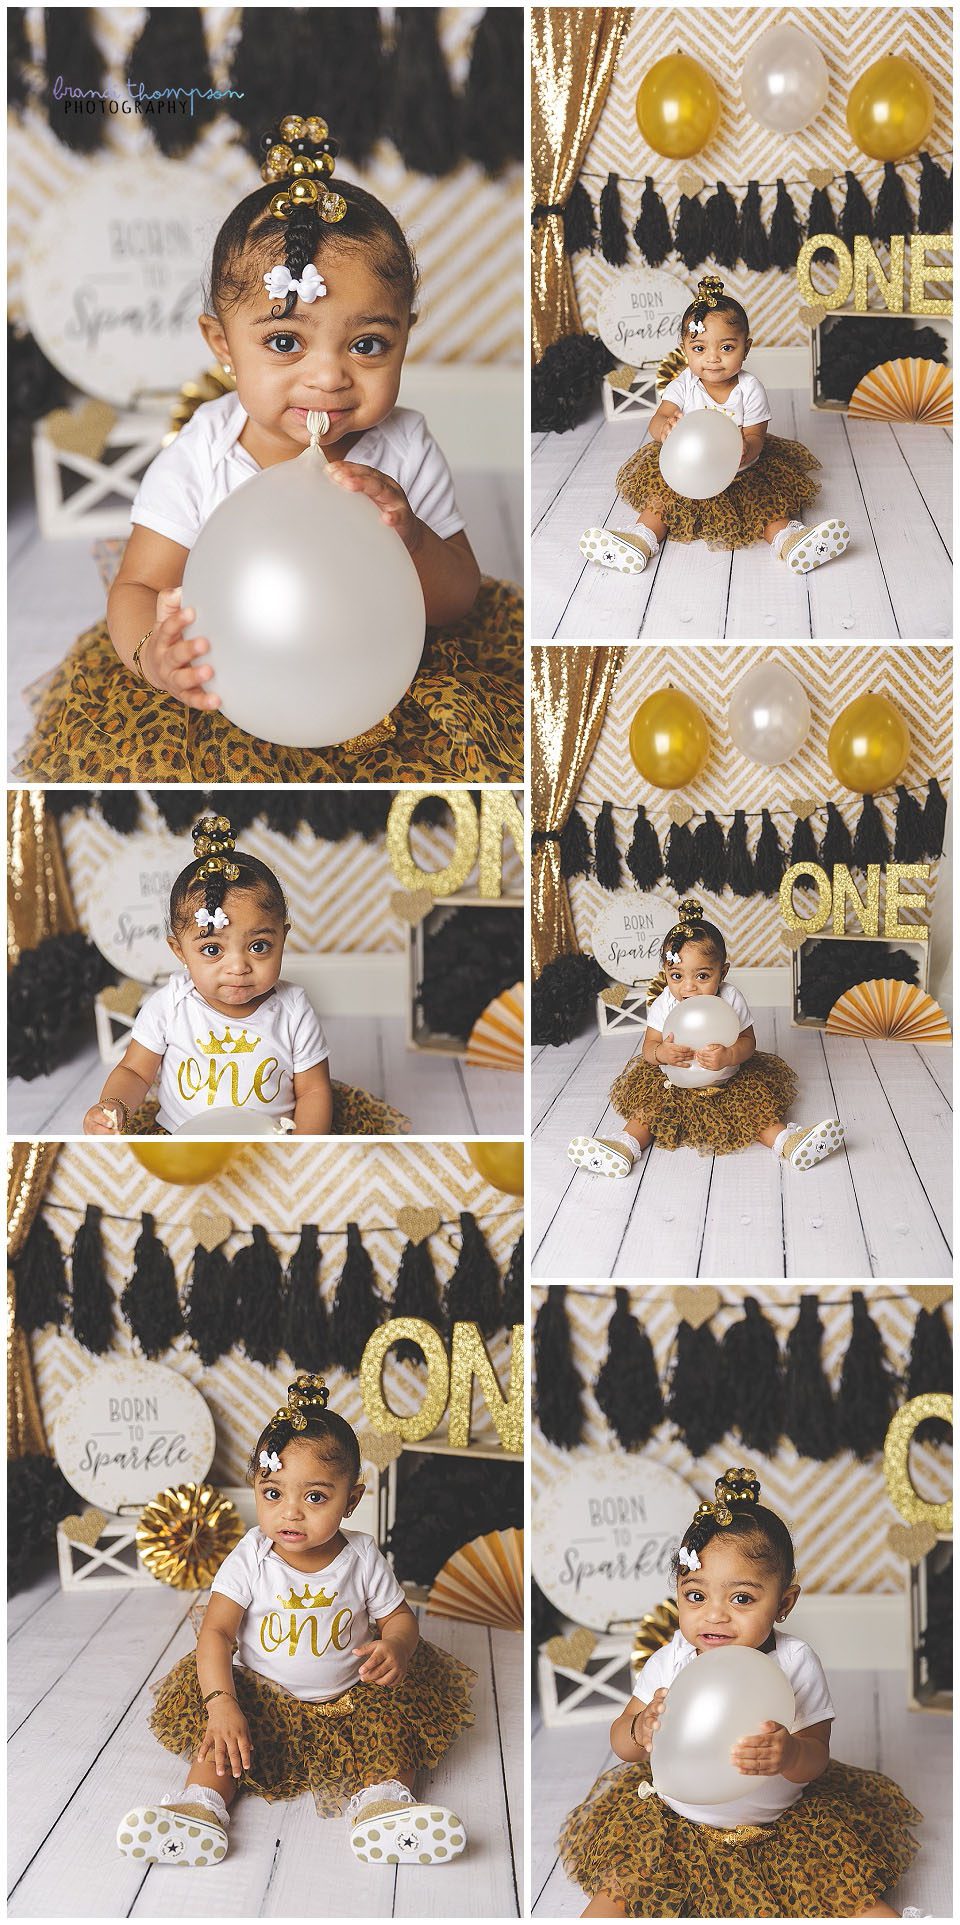 Black one year old baby girls first birthday session with gold, black and white set and yellow cake